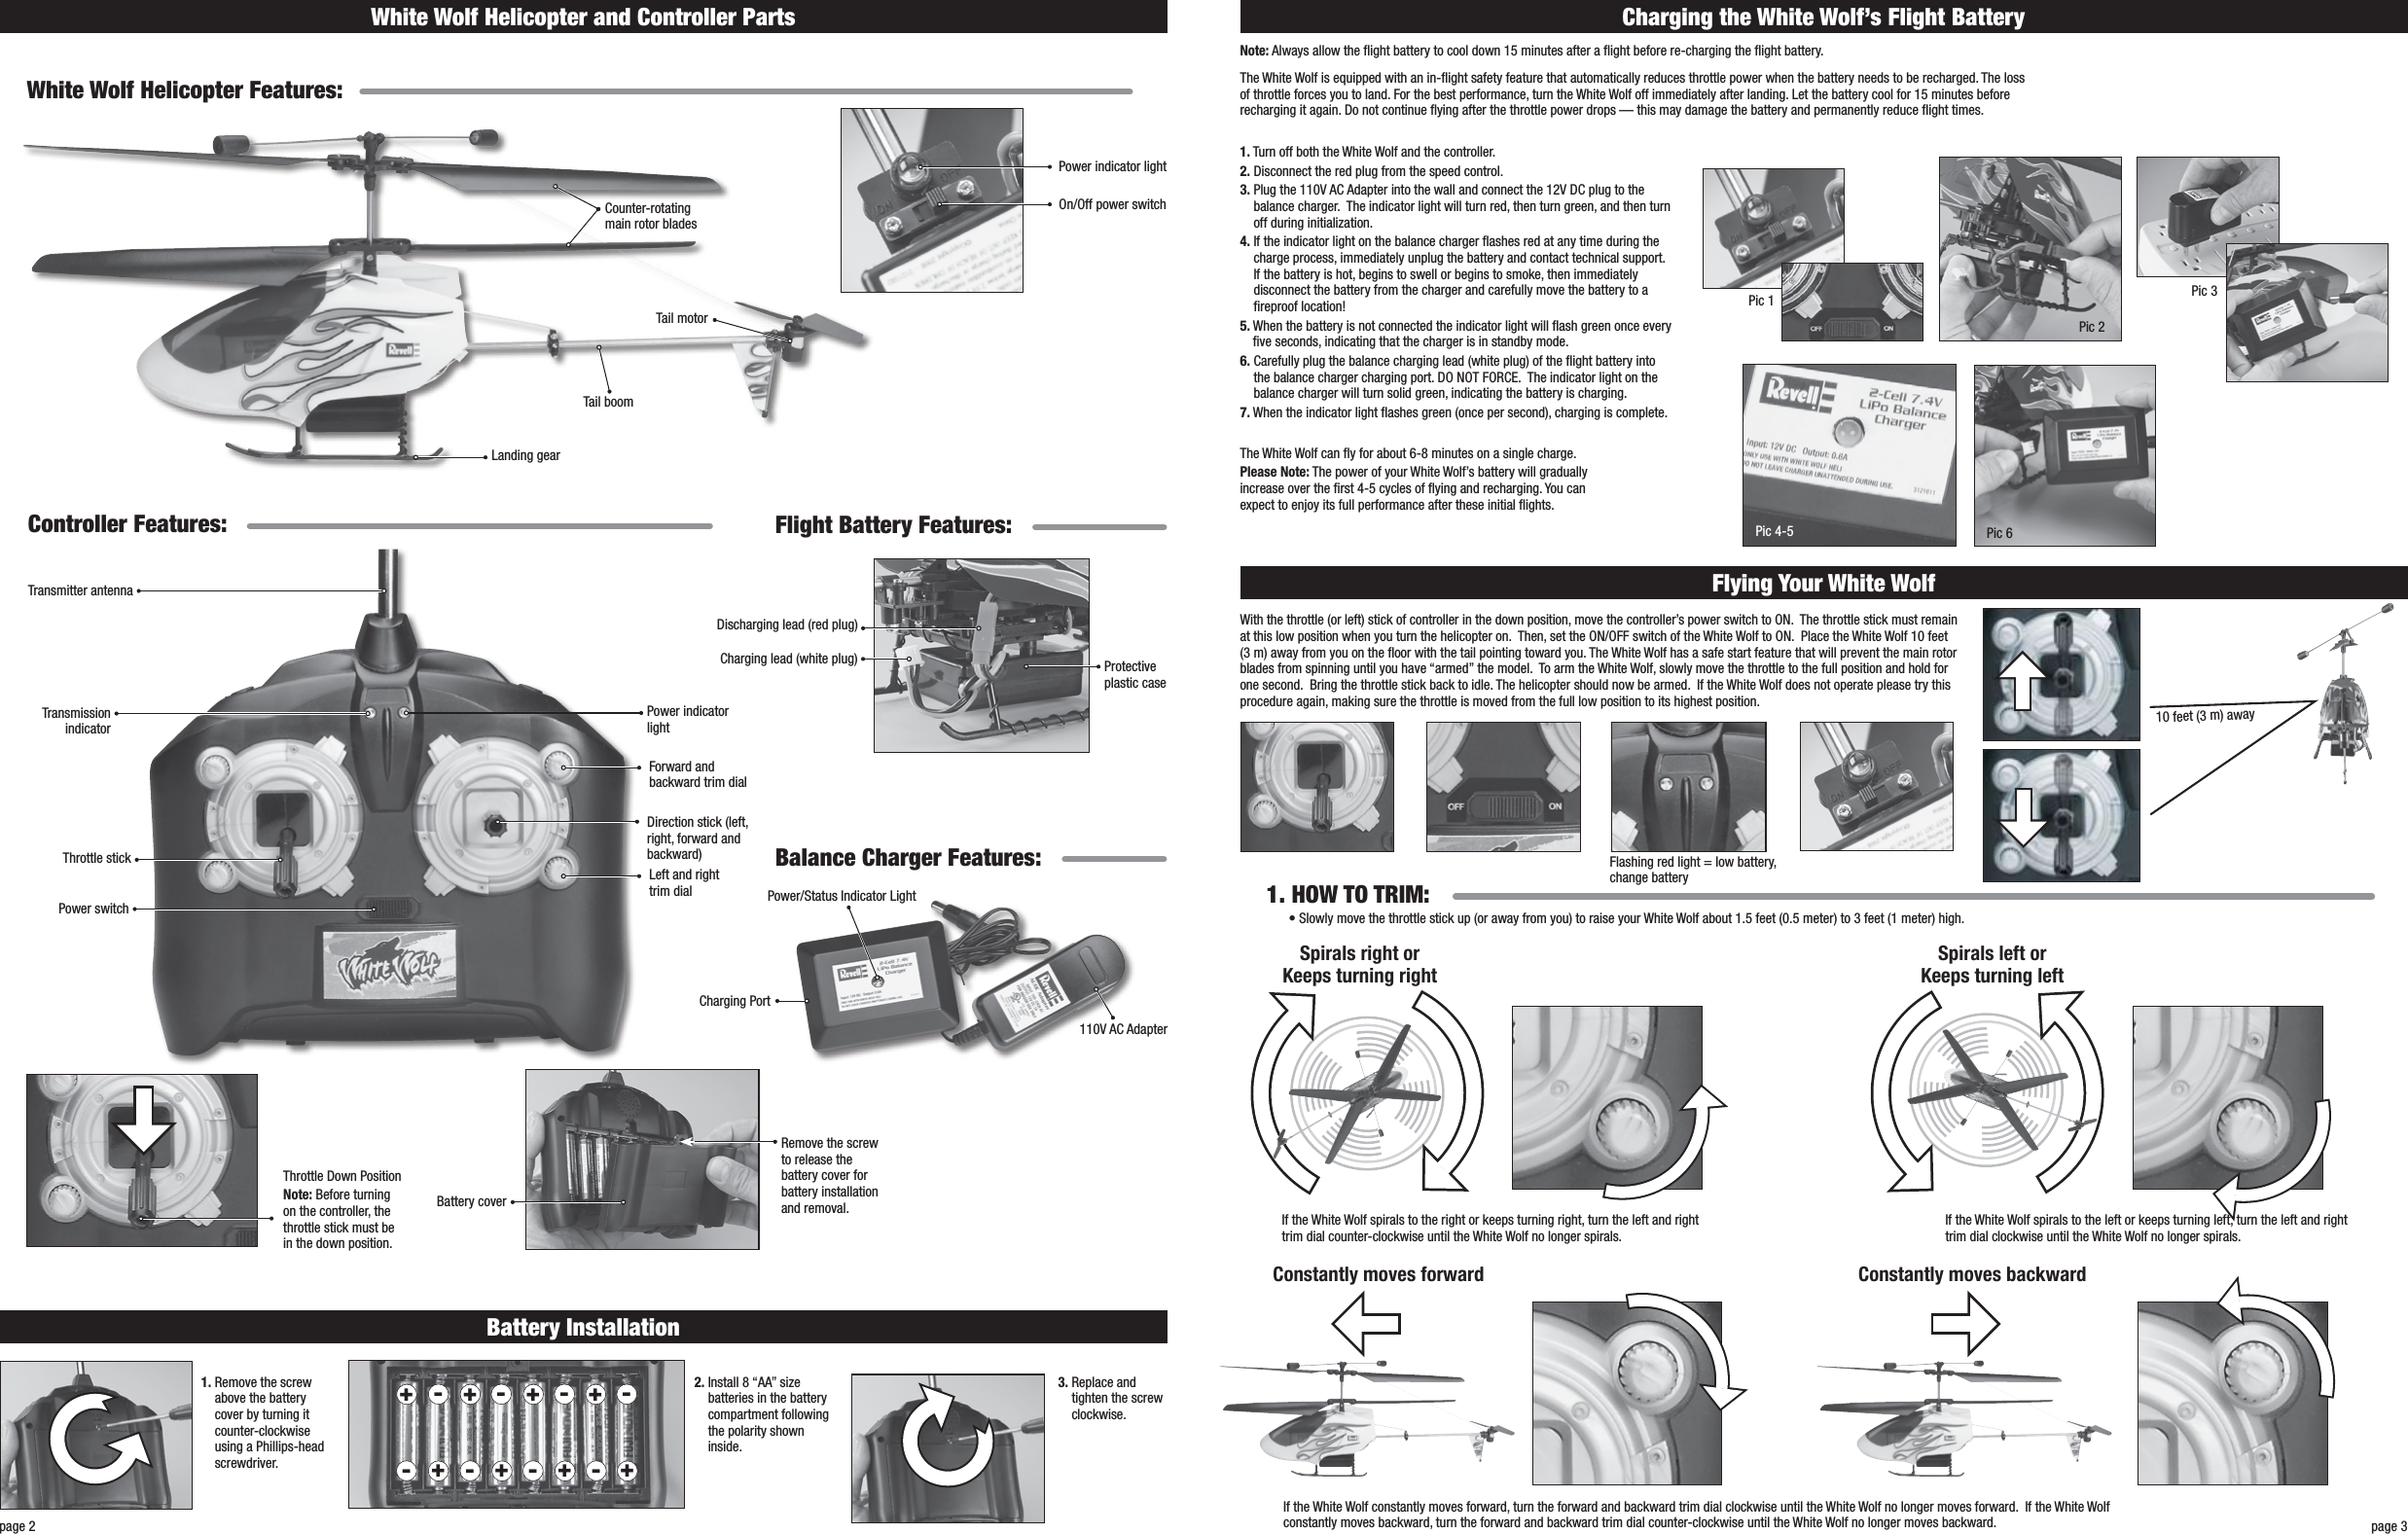 White Wolf Helicopter and Controller Partspage 3page 2White Wolf Helicopter Features:Counter-rotating main rotor bladesTail boomTail motorLanding gear On/Off power switchPower indicator lightController Features: Flight Battery Features:Balance Charger Features:Transmitter antennaTransmission indicatorThrottle stickDirection stick (left, right, forward and backward)Power switchLeft and right trim dialForward and backward trim dialPower indicator lightNote: Always allow the ight battery to cool down 15 minutes after a ight before re-charging the ight battery.1.  Turn off both the White Wolf and the controller.2.  Disconnect the red plug from the speed control. 3.  Plug the 110V AC Adapter into the wall and connect the 12V DC plug to the balance charger.  The indicator light will turn red, then turn green, and then turn off during initialization.  4.  If the indicator light on the balance charger ashes red at any time during the charge process, immediately unplug the battery and contact technical support.  If the battery is hot, begins to swell or begins to smoke, then immediately disconnect the battery from the charger and carefully move the battery to a reproof location!5.  When the battery is not connected the indicator light will ash green once every ve seconds, indicating that the charger is in standby mode.6.  Carefully plug the balance charging lead (white plug) of the ight battery into the balance charger charging port. DO NOT FORCE.  The indicator light on the balance charger will turn solid green, indicating the battery is charging.7.  When the indicator light ashes green (once per second), charging is complete.Remove the screw to release the battery cover for battery installation and removal.Throttle Down PositionNote: Before turning on the controller, the throttle stick must be in the down position.Battery cover1.  Remove the screw above the battery cover by turning it counter-clockwise using a Phillips-head screwdriver.2.  Install 8 “AA” size batteries in the battery compartment following the polarity shown inside.3.  Replace and tighten the screw clockwise. Battery InstallationCharging the White Wolf’s Flight BatteryFlying Your White Wolf• Slowly move the throttle stick up (or away from you) to raise your White Wolf about 1.5 feet (0.5 meter) to 3 feet (1 meter) high.1. HOW TO TRIM:- ------ -++++++++The White Wolf can y for about 6-8 minutes on a single charge.Please Note: The power of your White Wolf’s battery will gradually increase over the rst 4-5 cycles of ying and recharging. You can expect to enjoy its full performance after these initial ights.With the throttle (or left) stick of controller in the down position, move the controller’s power switch to ON.  The throttle stick must remain at this low position when you turn the helicopter on.  Then, set the ON/OFF switch of the White Wolf to ON.  Place the White Wolf 10 feet (3 m) away from you on the oor with the tail pointing toward you. The White Wolf has a safe start feature that will prevent the main rotor blades from spinning until you have “armed” the model.  To arm the White Wolf, slowly move the throttle to the full position and hold for one second.  Bring the throttle stick back to idle. The helicopter should now be armed.  If the White Wolf does not operate please try this procedure again, making sure the throttle is moved from the full low position to its highest position.Flashing red light = low battery, change batteryIf the White Wolf spirals to the left or keeps turning left, turn the left and right trim dial clockwise until the White Wolf no longer spirals.If the White Wolf constantly moves forward, turn the forward and backward trim dial clockwise until the White Wolf no longer moves forward.  If the White Wolf constantly moves backward, turn the forward and backward trim dial counter-clockwise until the White Wolf no longer moves backward.If the White Wolf spirals to the right or keeps turning right, turn the left and right trim dial counter-clockwise until the White Wolf no longer spirals.Spirals right or  Keeps turning rightSpirals left or  Keeps turning leftConstantly moves forward Constantly moves backwardThe White Wolf is equipped with an in-ight safety feature that automatically reduces throttle power when the battery needs to be recharged. The loss of throttle forces you to land. For the best performance, turn the White Wolf off immediately after landing. Let the battery cool for 15 minutes before recharging it again. Do not continue ying after the throttle power drops — this may damage the battery and permanently reduce ight times.110V AC AdapterPower/Status Indicator LightCharging PortProtective plastic caseCharging lead (white plug)Discharging lead (red plug)10 feet (3 m) awayPic 1Pic 2Pic 3Pic 6Pic 4-5